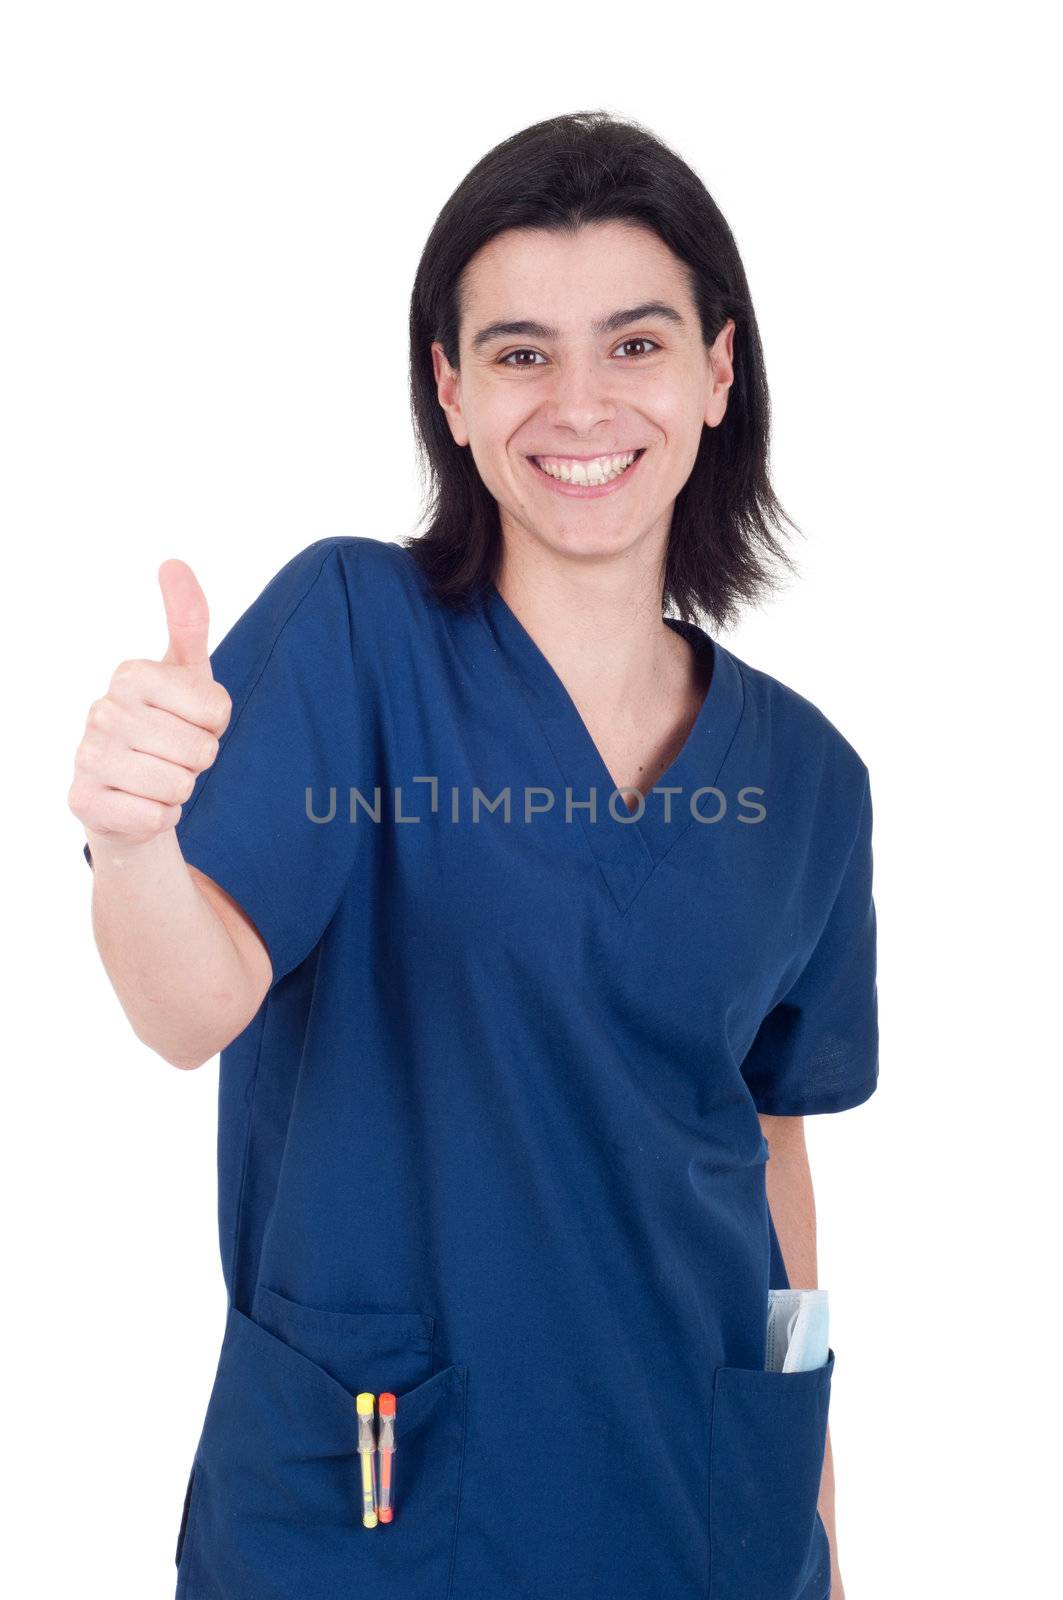 smiling female dentist showing thumb up sign isolated on white background